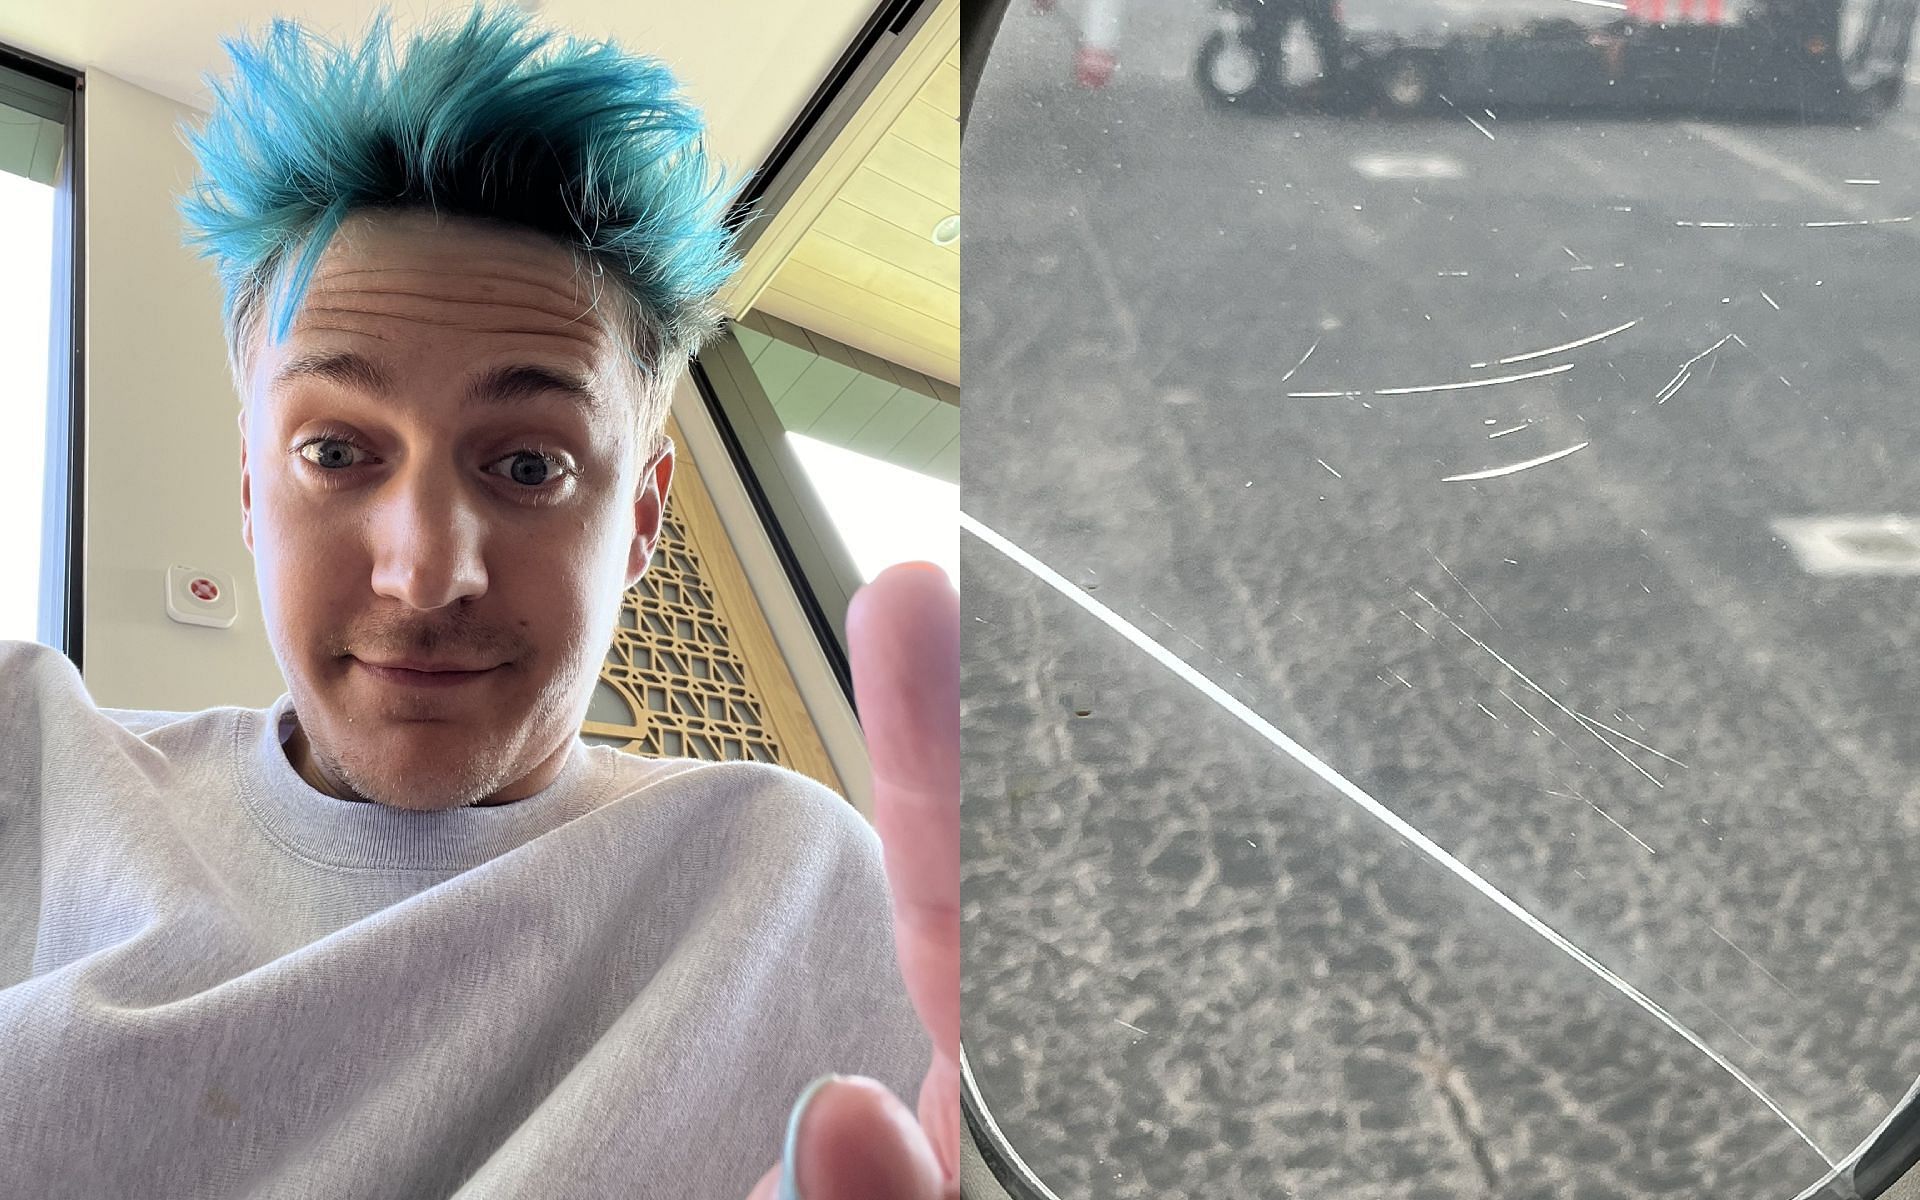 Tyler shares the image of the cracked window his flight to Florida (Images via Ninja/Twitter)